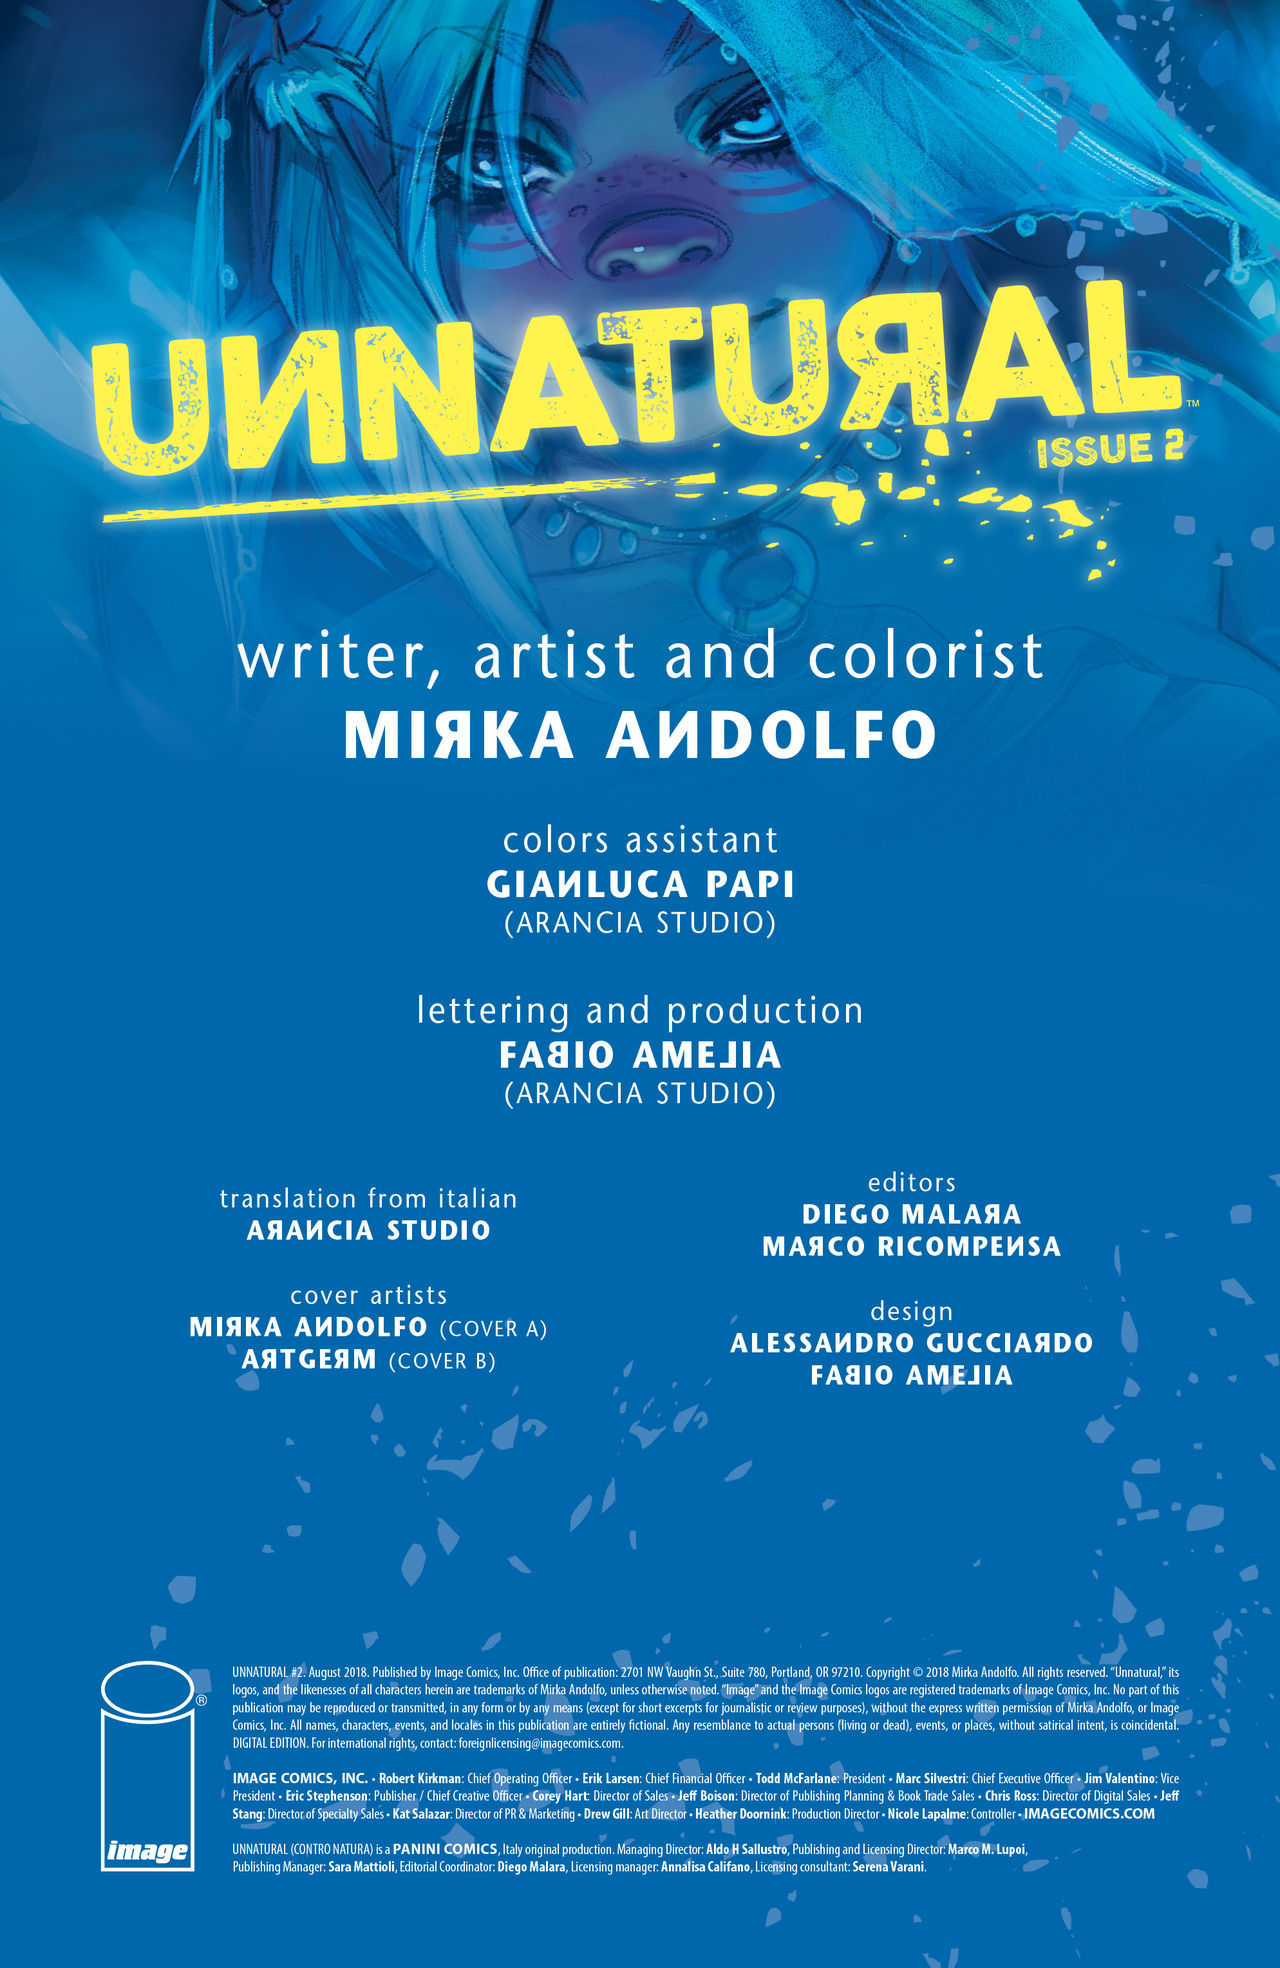 Unnatural Issue 2 by Mirka Andolfo page 2